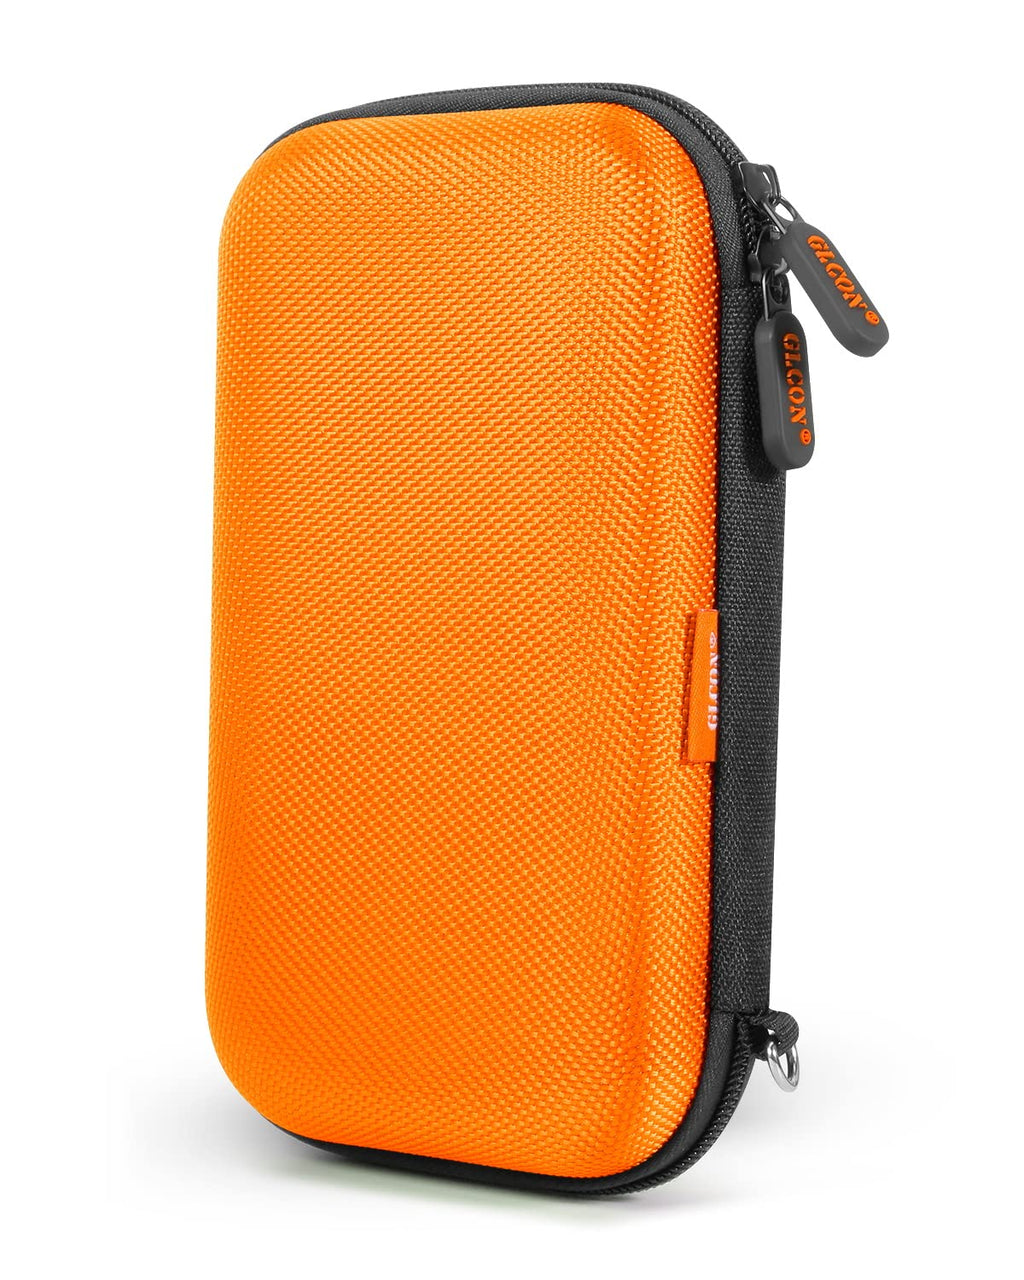 Orange Shockproof Hard EVA Carrying Case Travel Pouch for External Hard Drive, Power Bank, Cell Phone, Cable, Cord - Portable Small Electronic Accessories Organizer Storage Zipper Pouch Orange